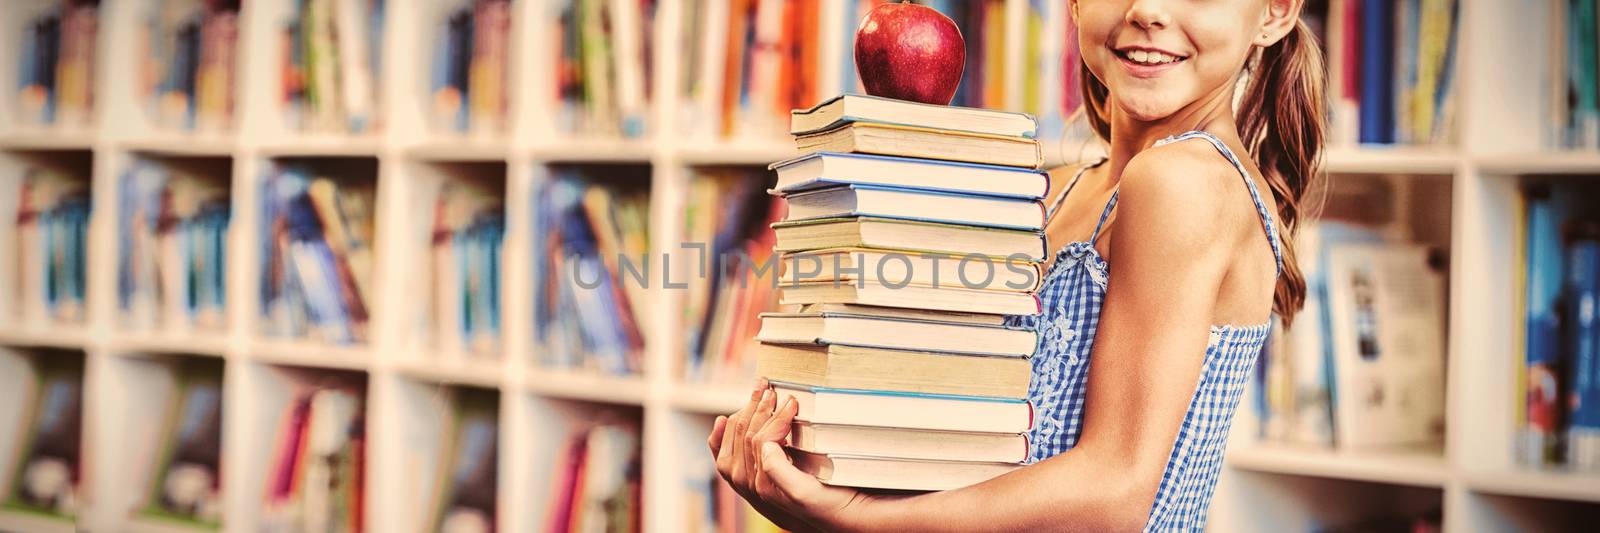 School girl holding stack of books in library by Wavebreakmedia